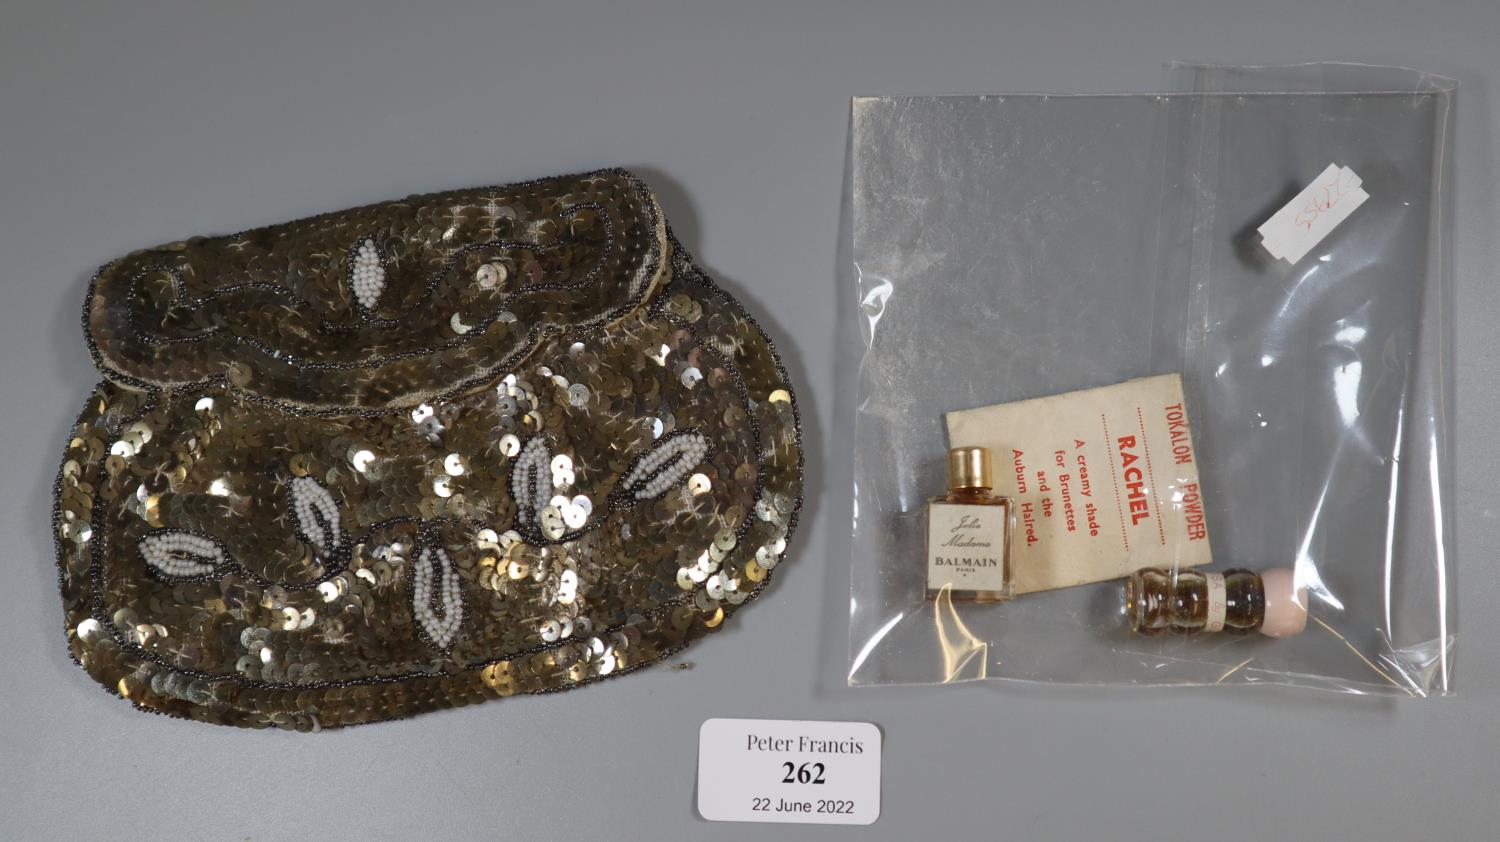 A vintage sequin and beaded handbag together with two miniature perfumes, Julio Madame by Balmain